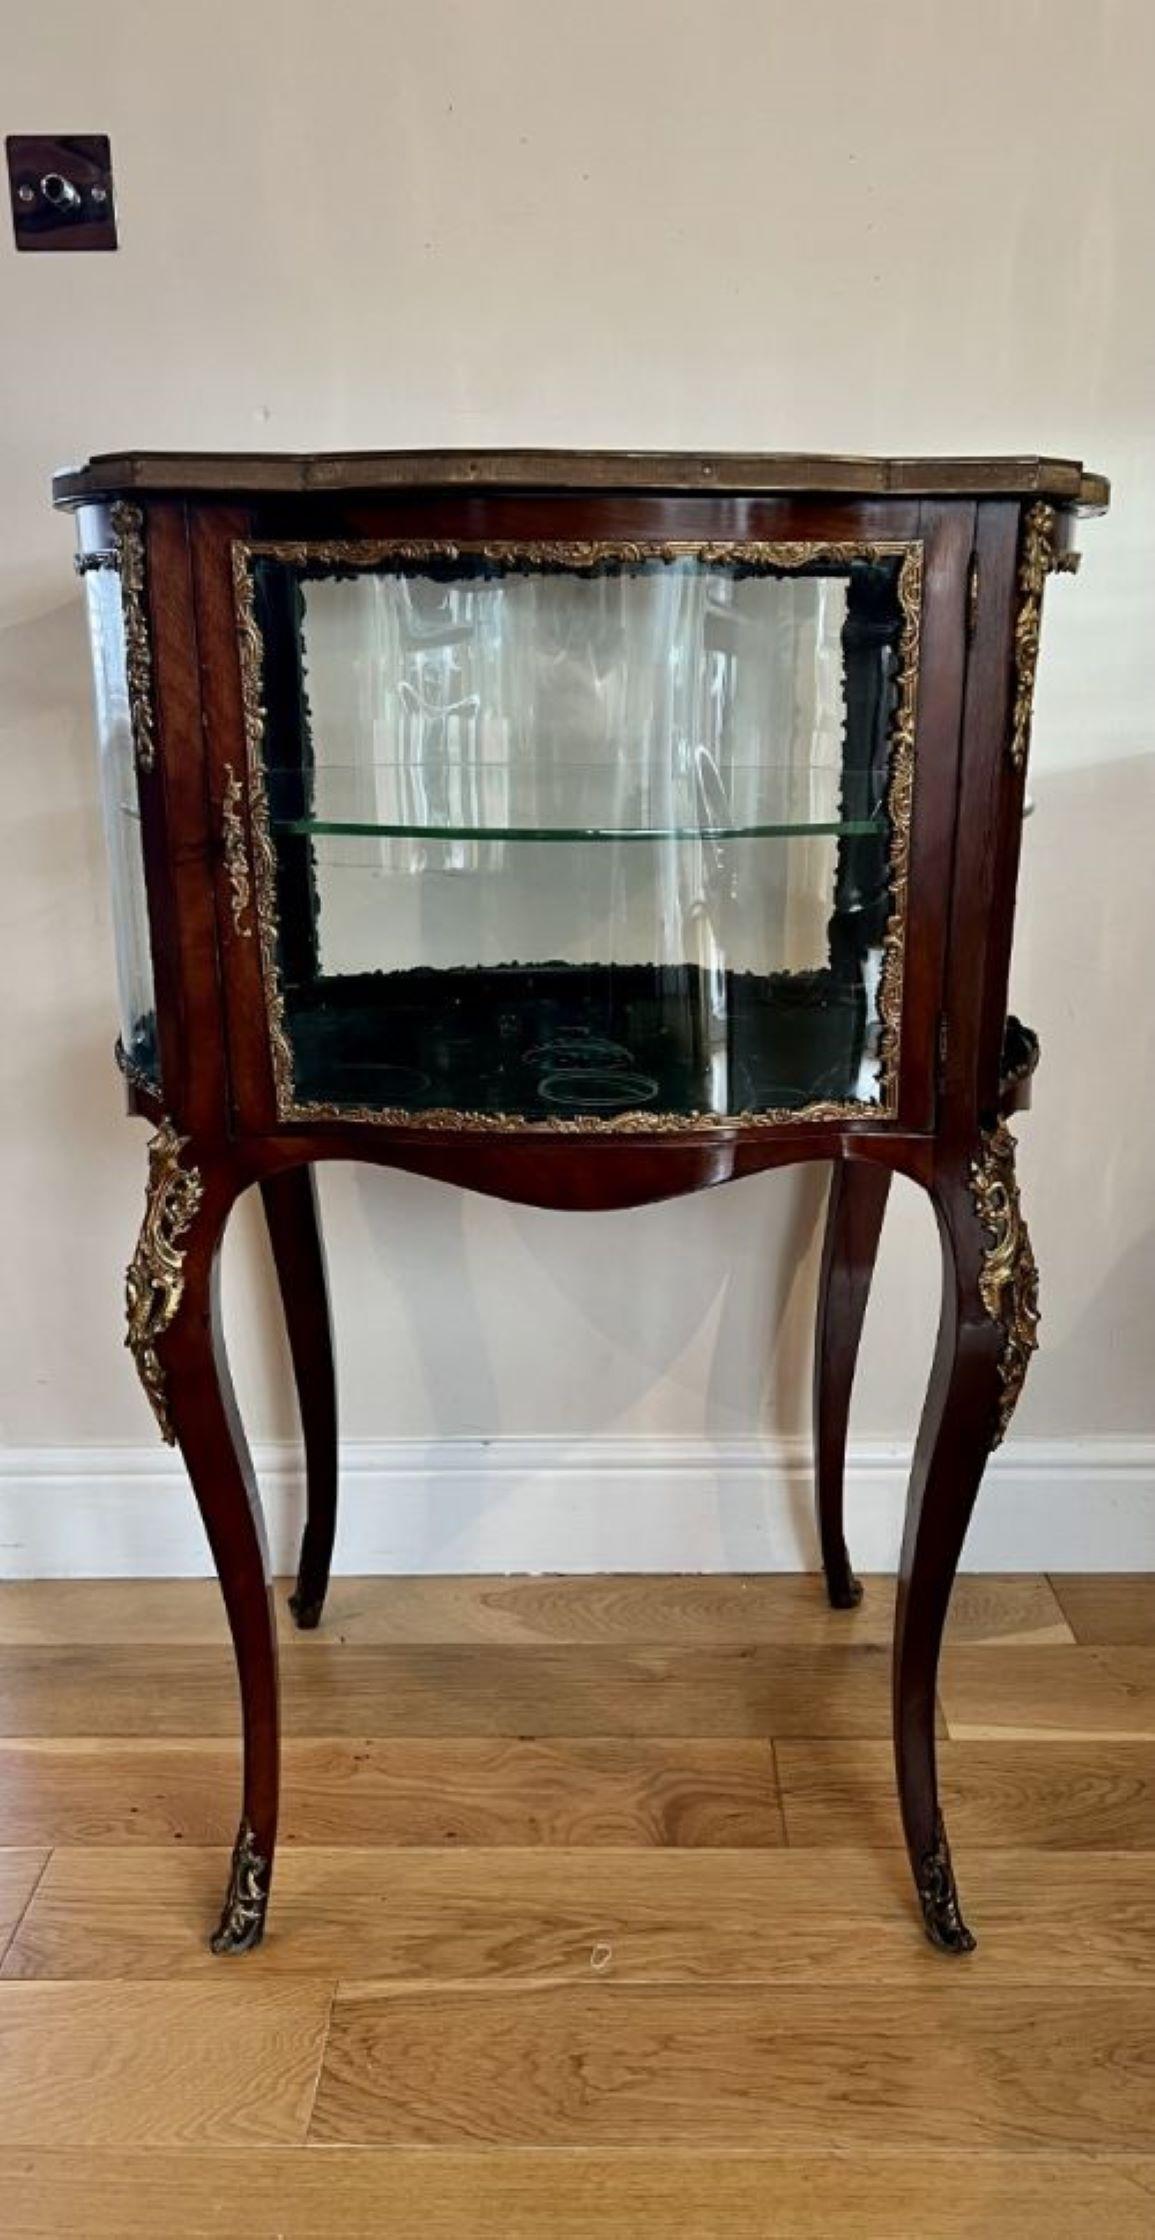 Fine quality antique Victorian French freestanding ormolu mounted display cabinet having a fine quality serpentine shaped mahogany and ormolu mounted freestanding display cabinet with one door opening to reveal a glass display shelf standing on